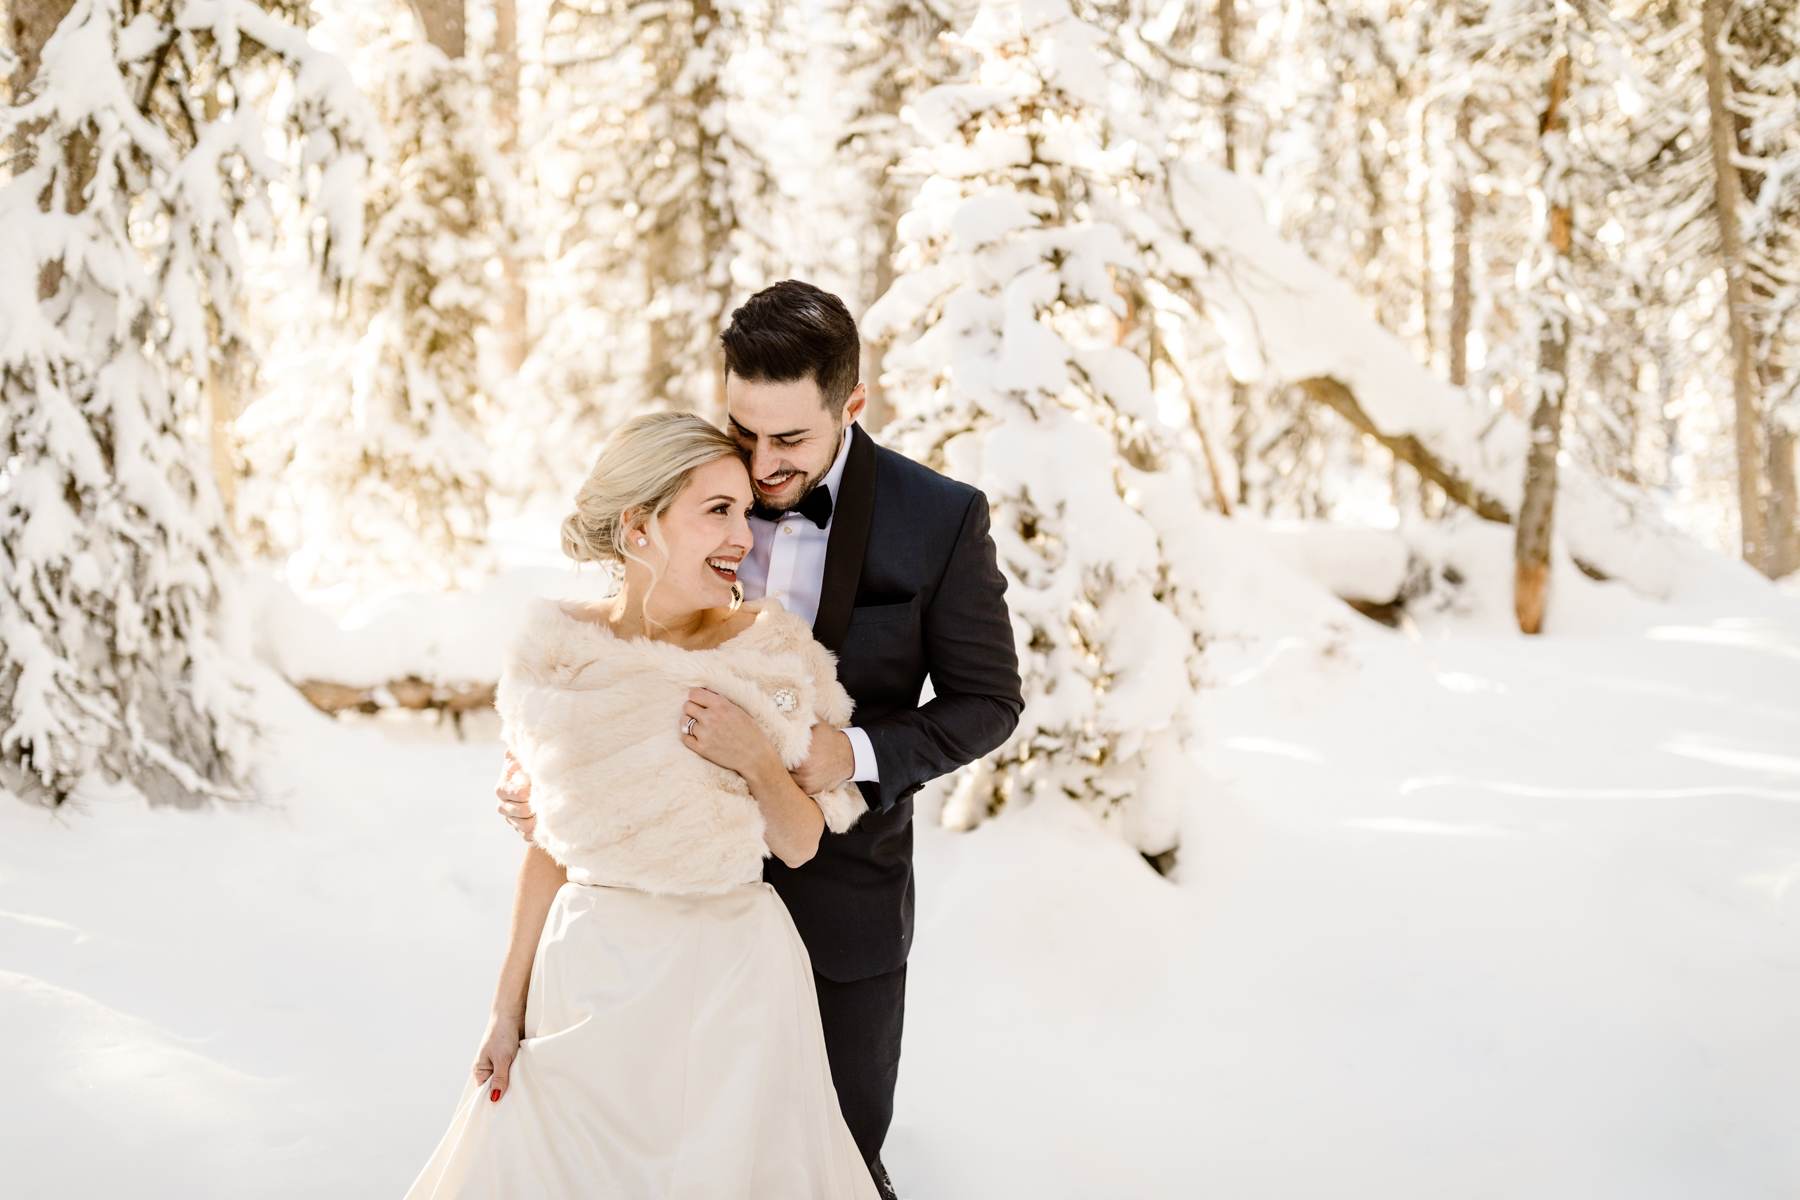 Fairmont Chateau Lake Louise Wedding Photography in Winter - Image 18